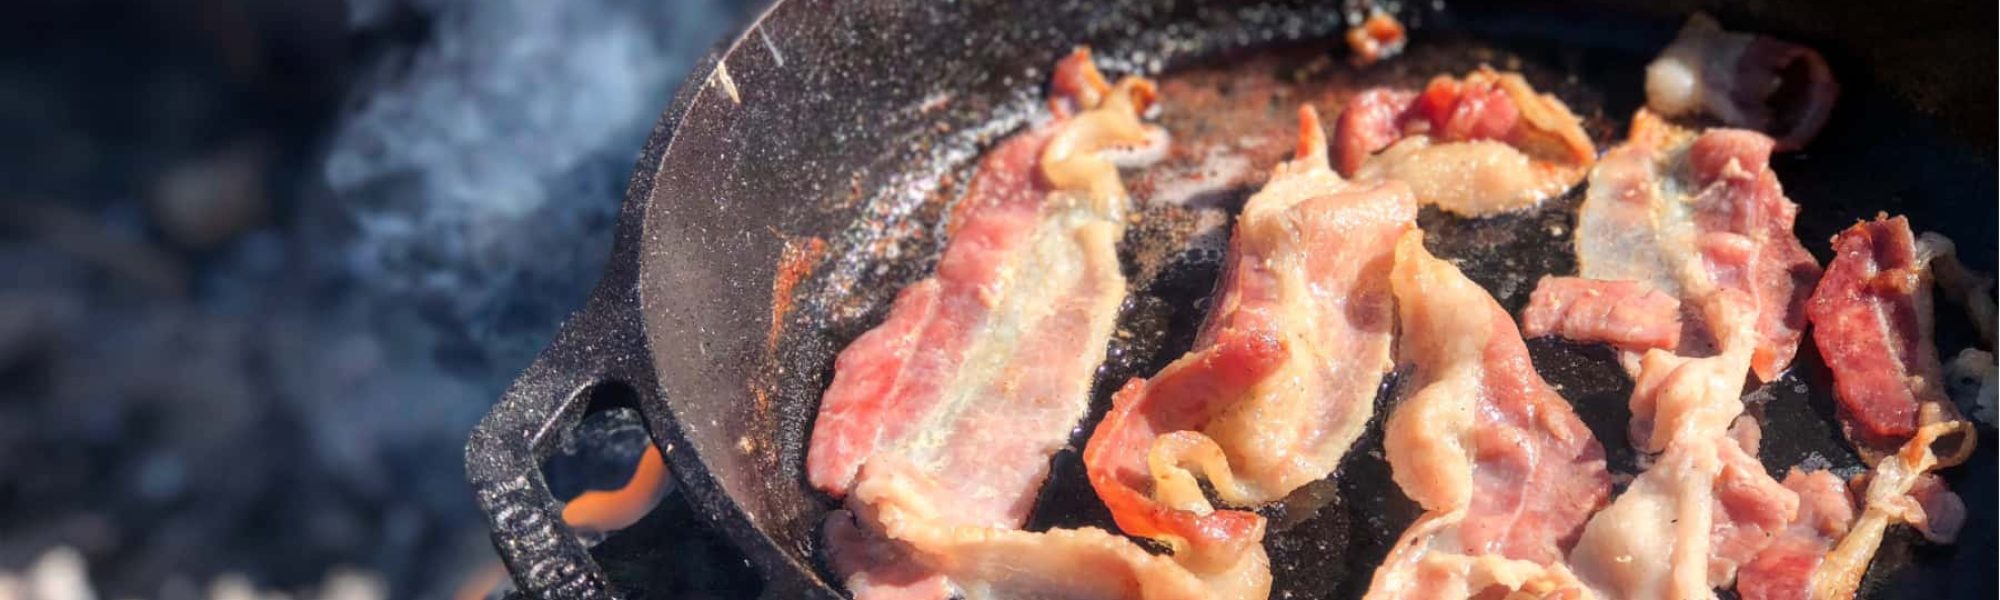 Delicious gourmet bacon is great for a keto diet.